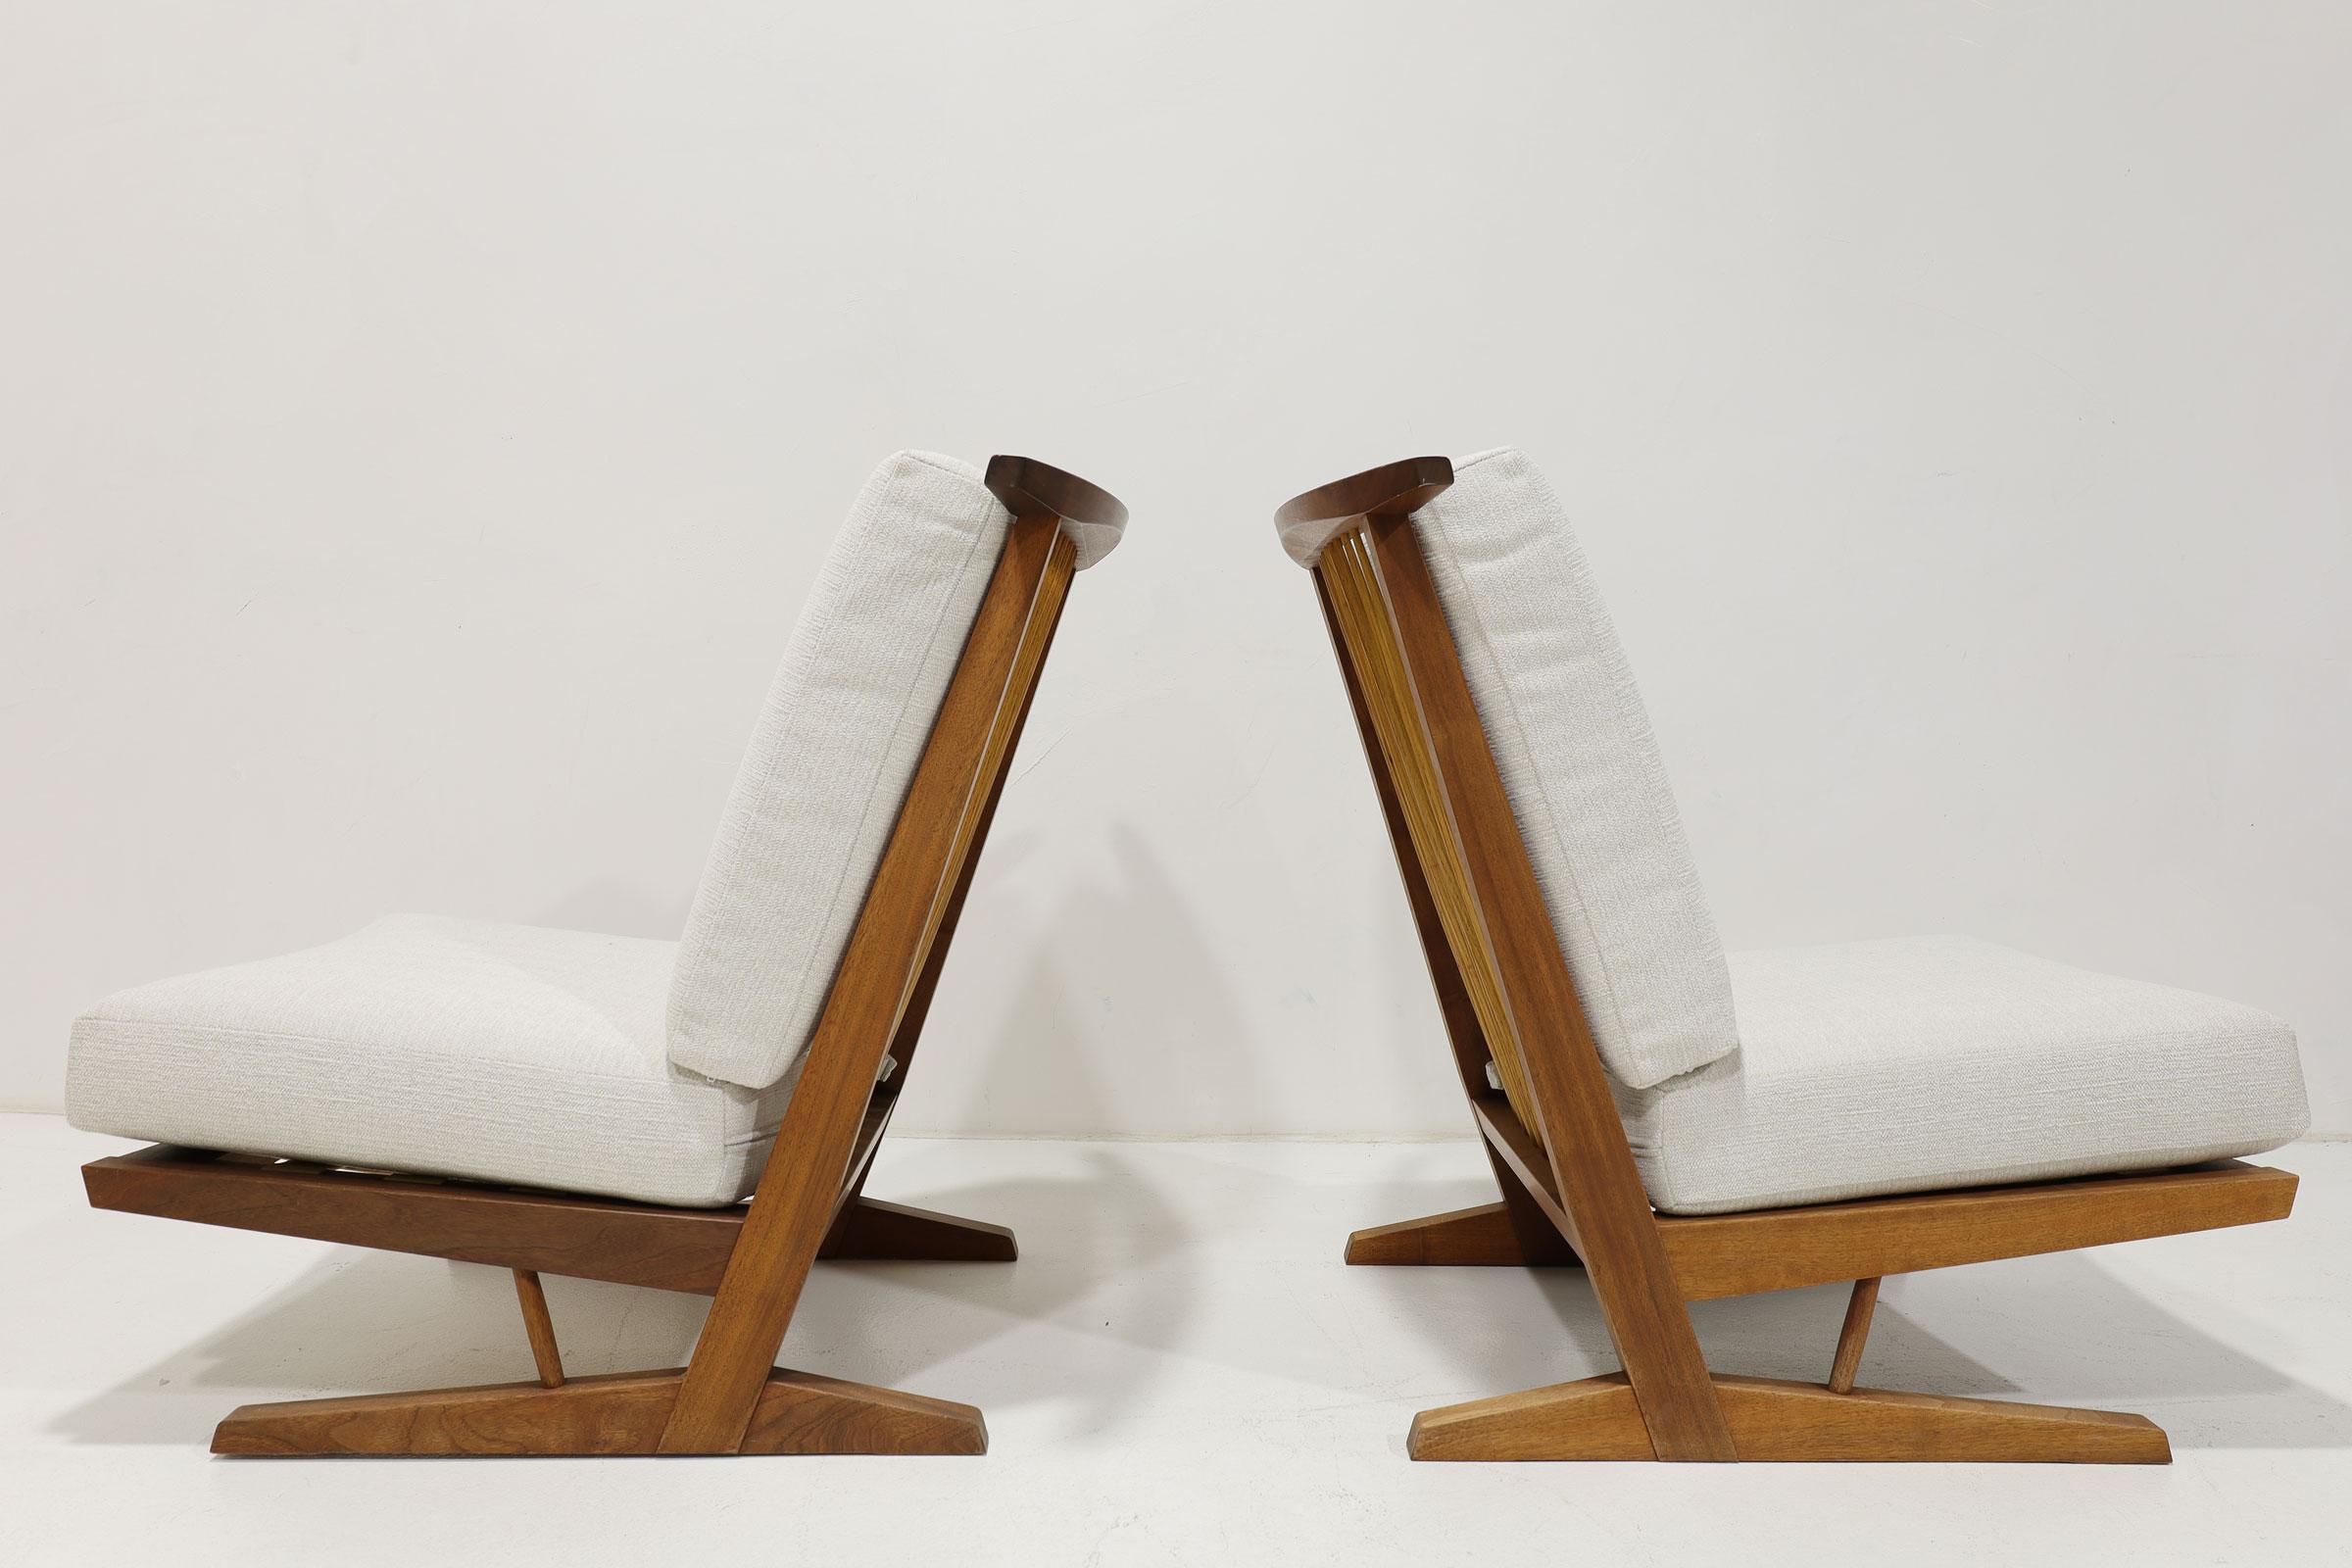 A beautiful pair of Conoid Lounge chairs by George Nakashima. Made by the only authorized manufacturer of Nakashima furniture outside of the United States, Sakura Seisakusho in Takamatsu, Japan. Cushions reupholstered in Holly Hunt. 